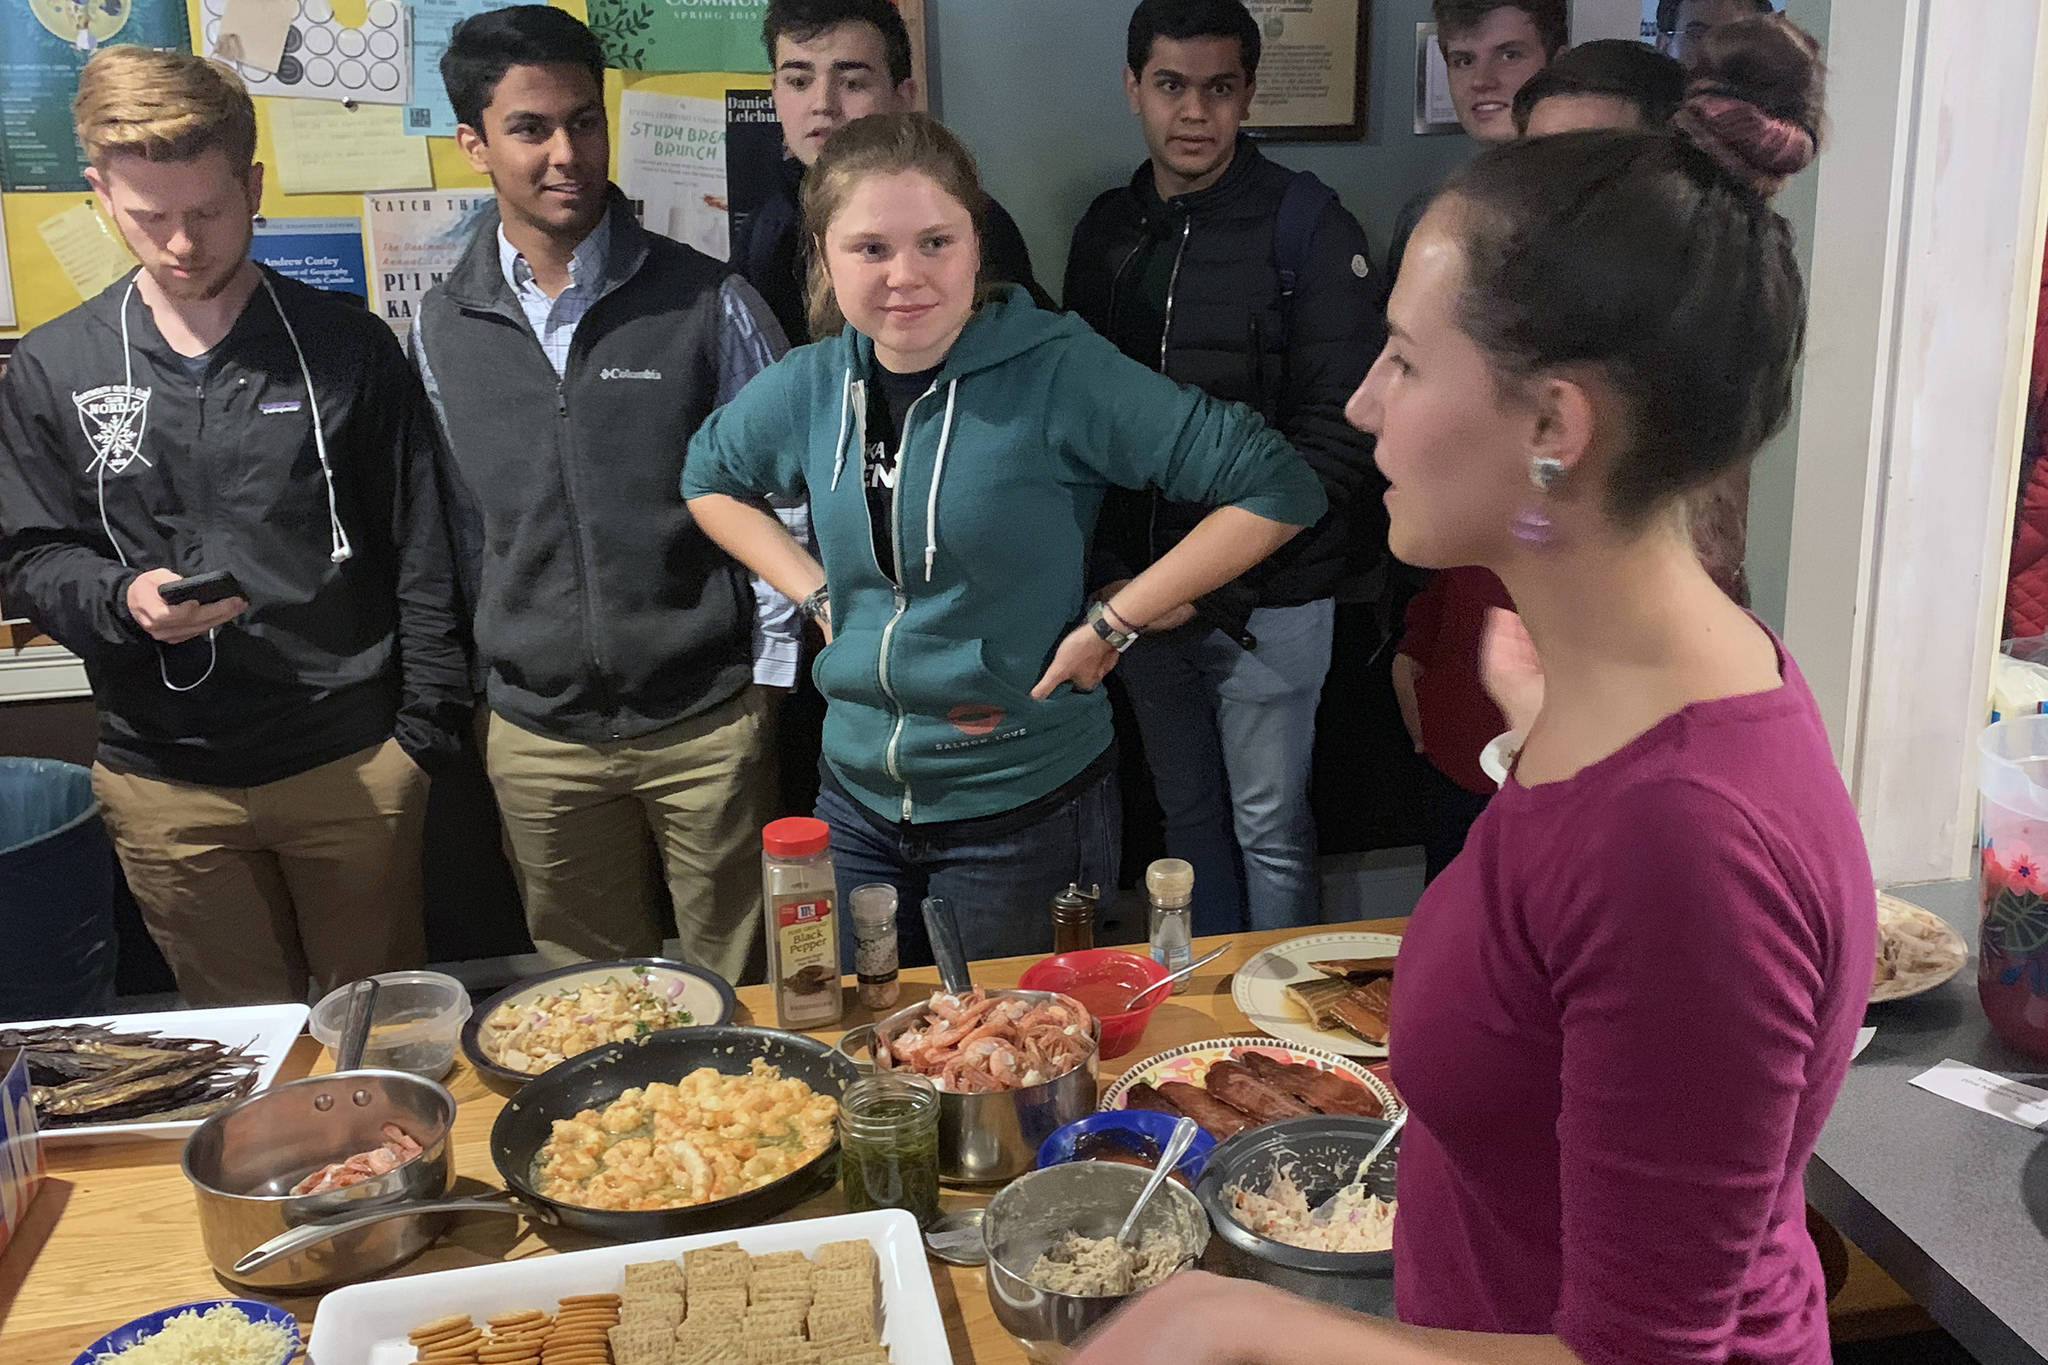 For Alaskan college students at Dartmouth, Aurora Club dinners provide taste of home